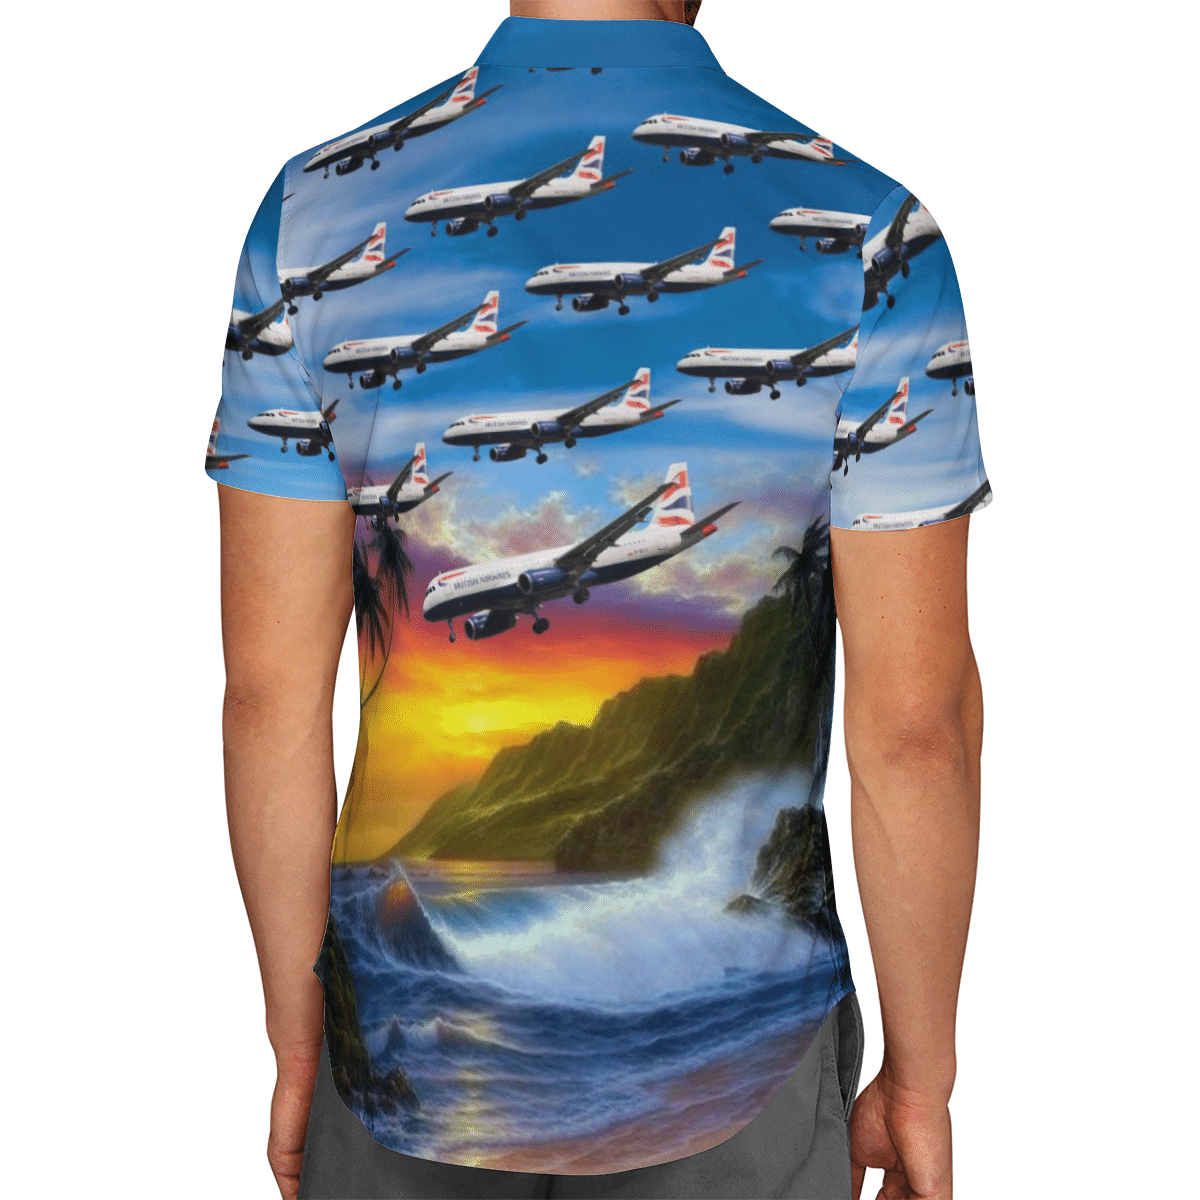 Going to the beach with a quality shirt 93